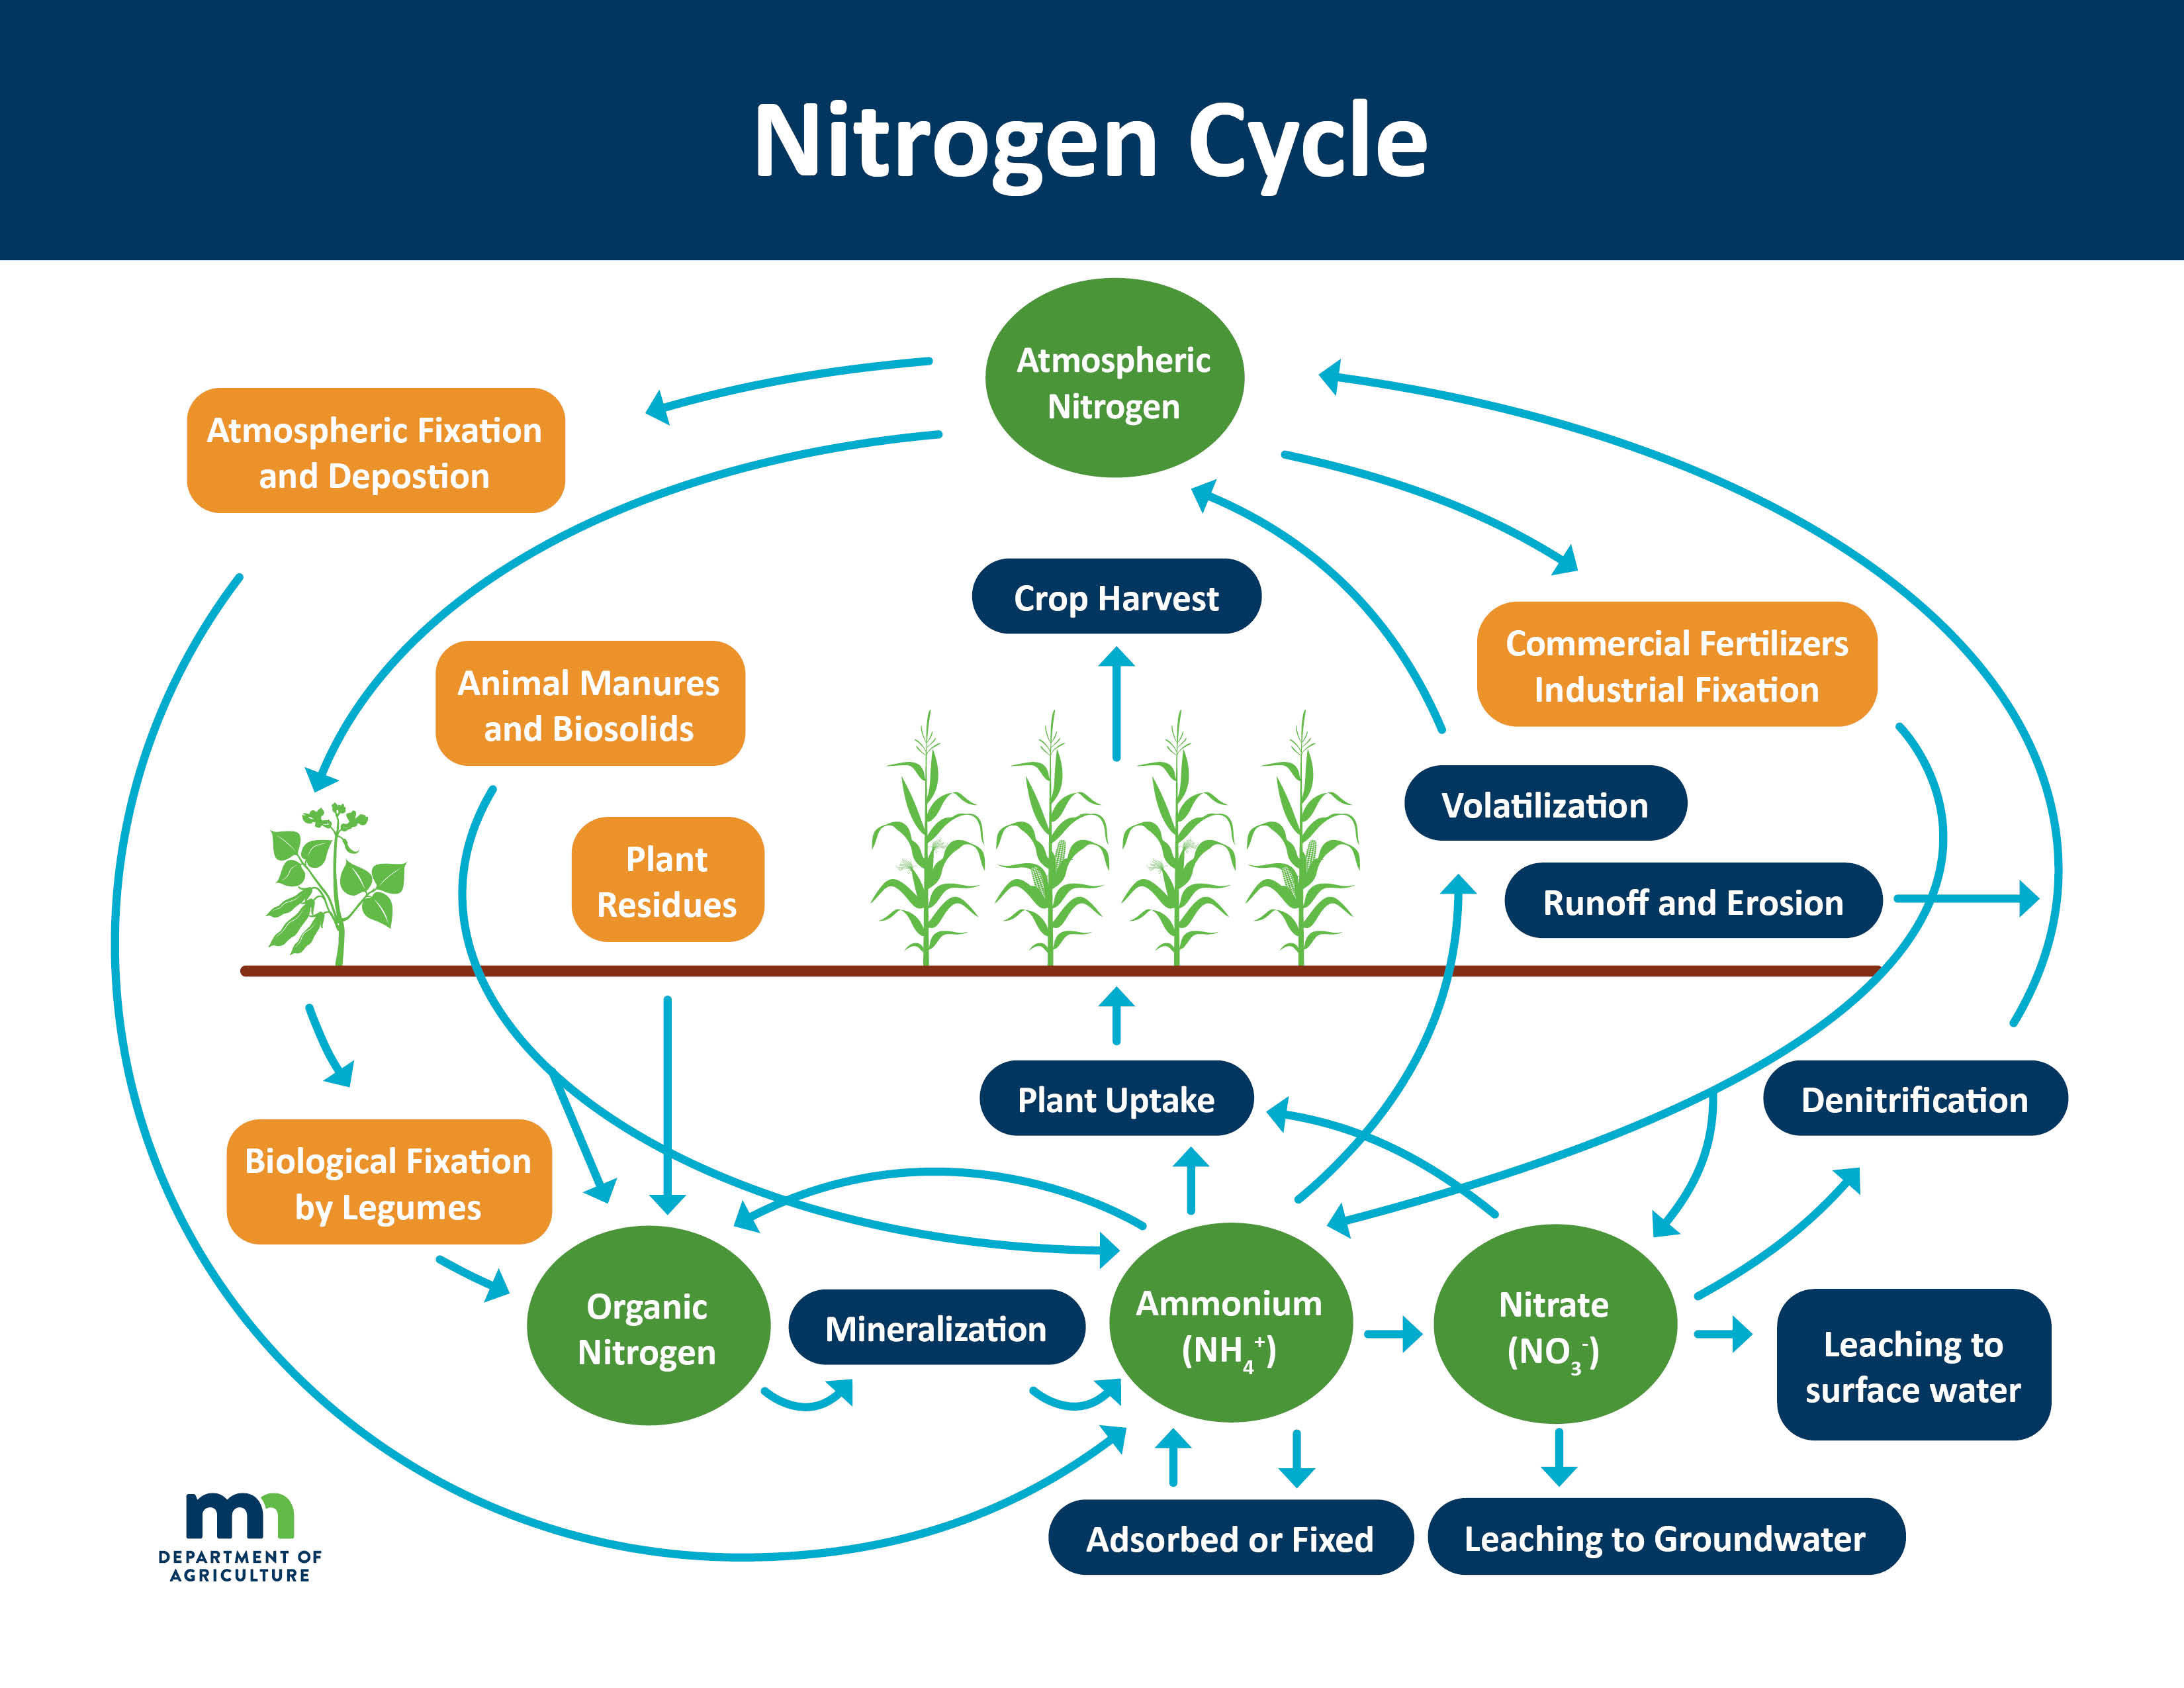 Graphic illustration of the nitrogen cycle on a farm field with corn and soybean crops. Atmospheric nitrogen is converted to ammonium and organic nitrogen respectively through atmospheric fixation and deposition and biological fixation by legumes and is added to the soil. Animal manures and biosolids, plant residues, and commercial fertilizers (industrial fixation) are sources of nitrogen that are incorporated into the soil as organic nitrogen (manure, biosolids, plants), ammonium (manure, biosolids, commercial fertilizers), or nitrate (commercial fertilizer). Once in the soil, organic nitrogen can be converted to ammonium, and ammonium to organic nitrogen or nitrate. Ammonium can be adsorbed, fixed, volatilized, or be taken up by plants. Nitrate can leach deeper into the soil, be taken up by plants or released back into the air through denitrification. Nitrogen leaves the system through crop harvest or by runoff and erosion.  